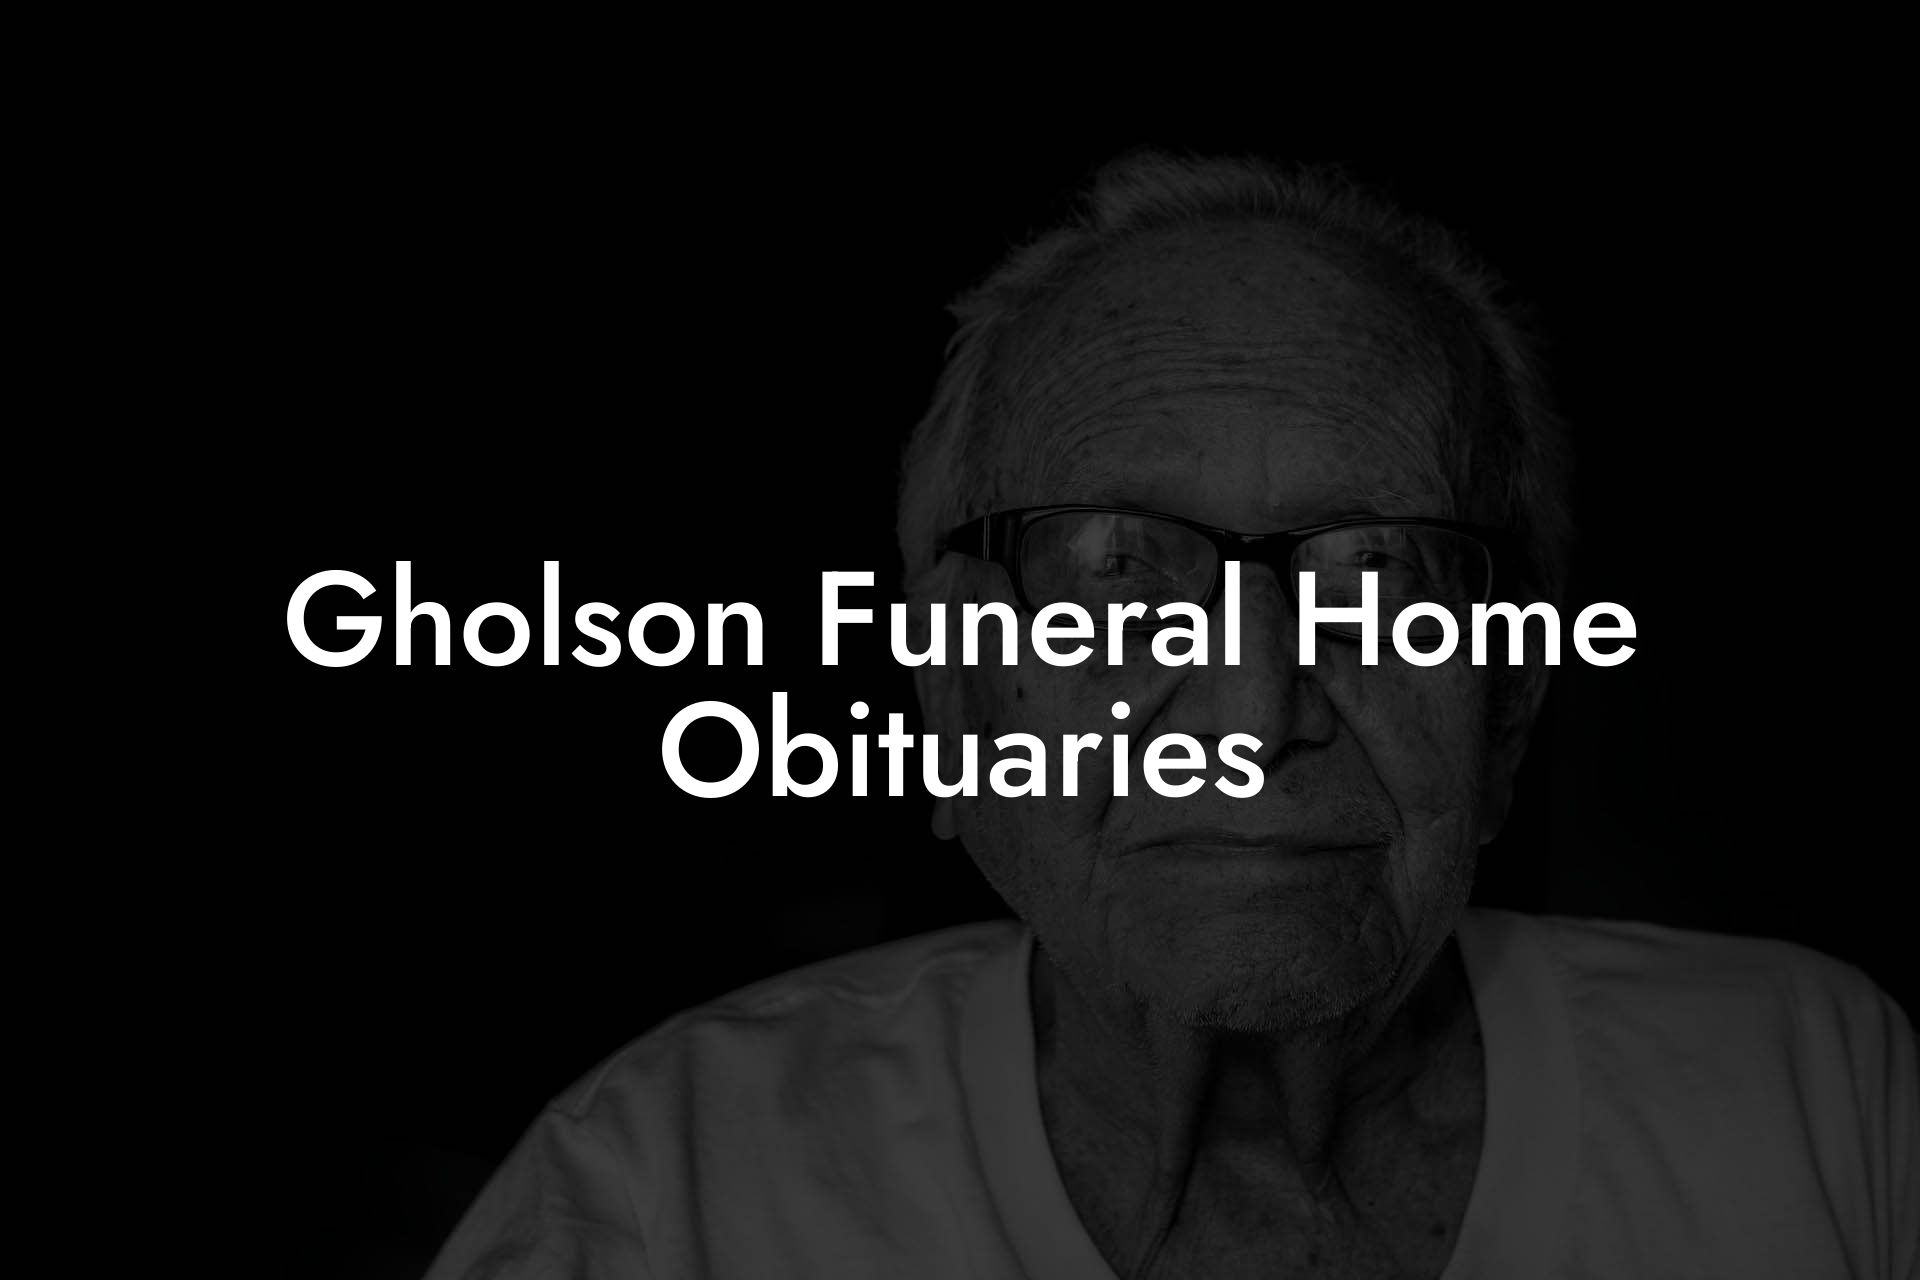 Gholson Funeral Home Obituaries